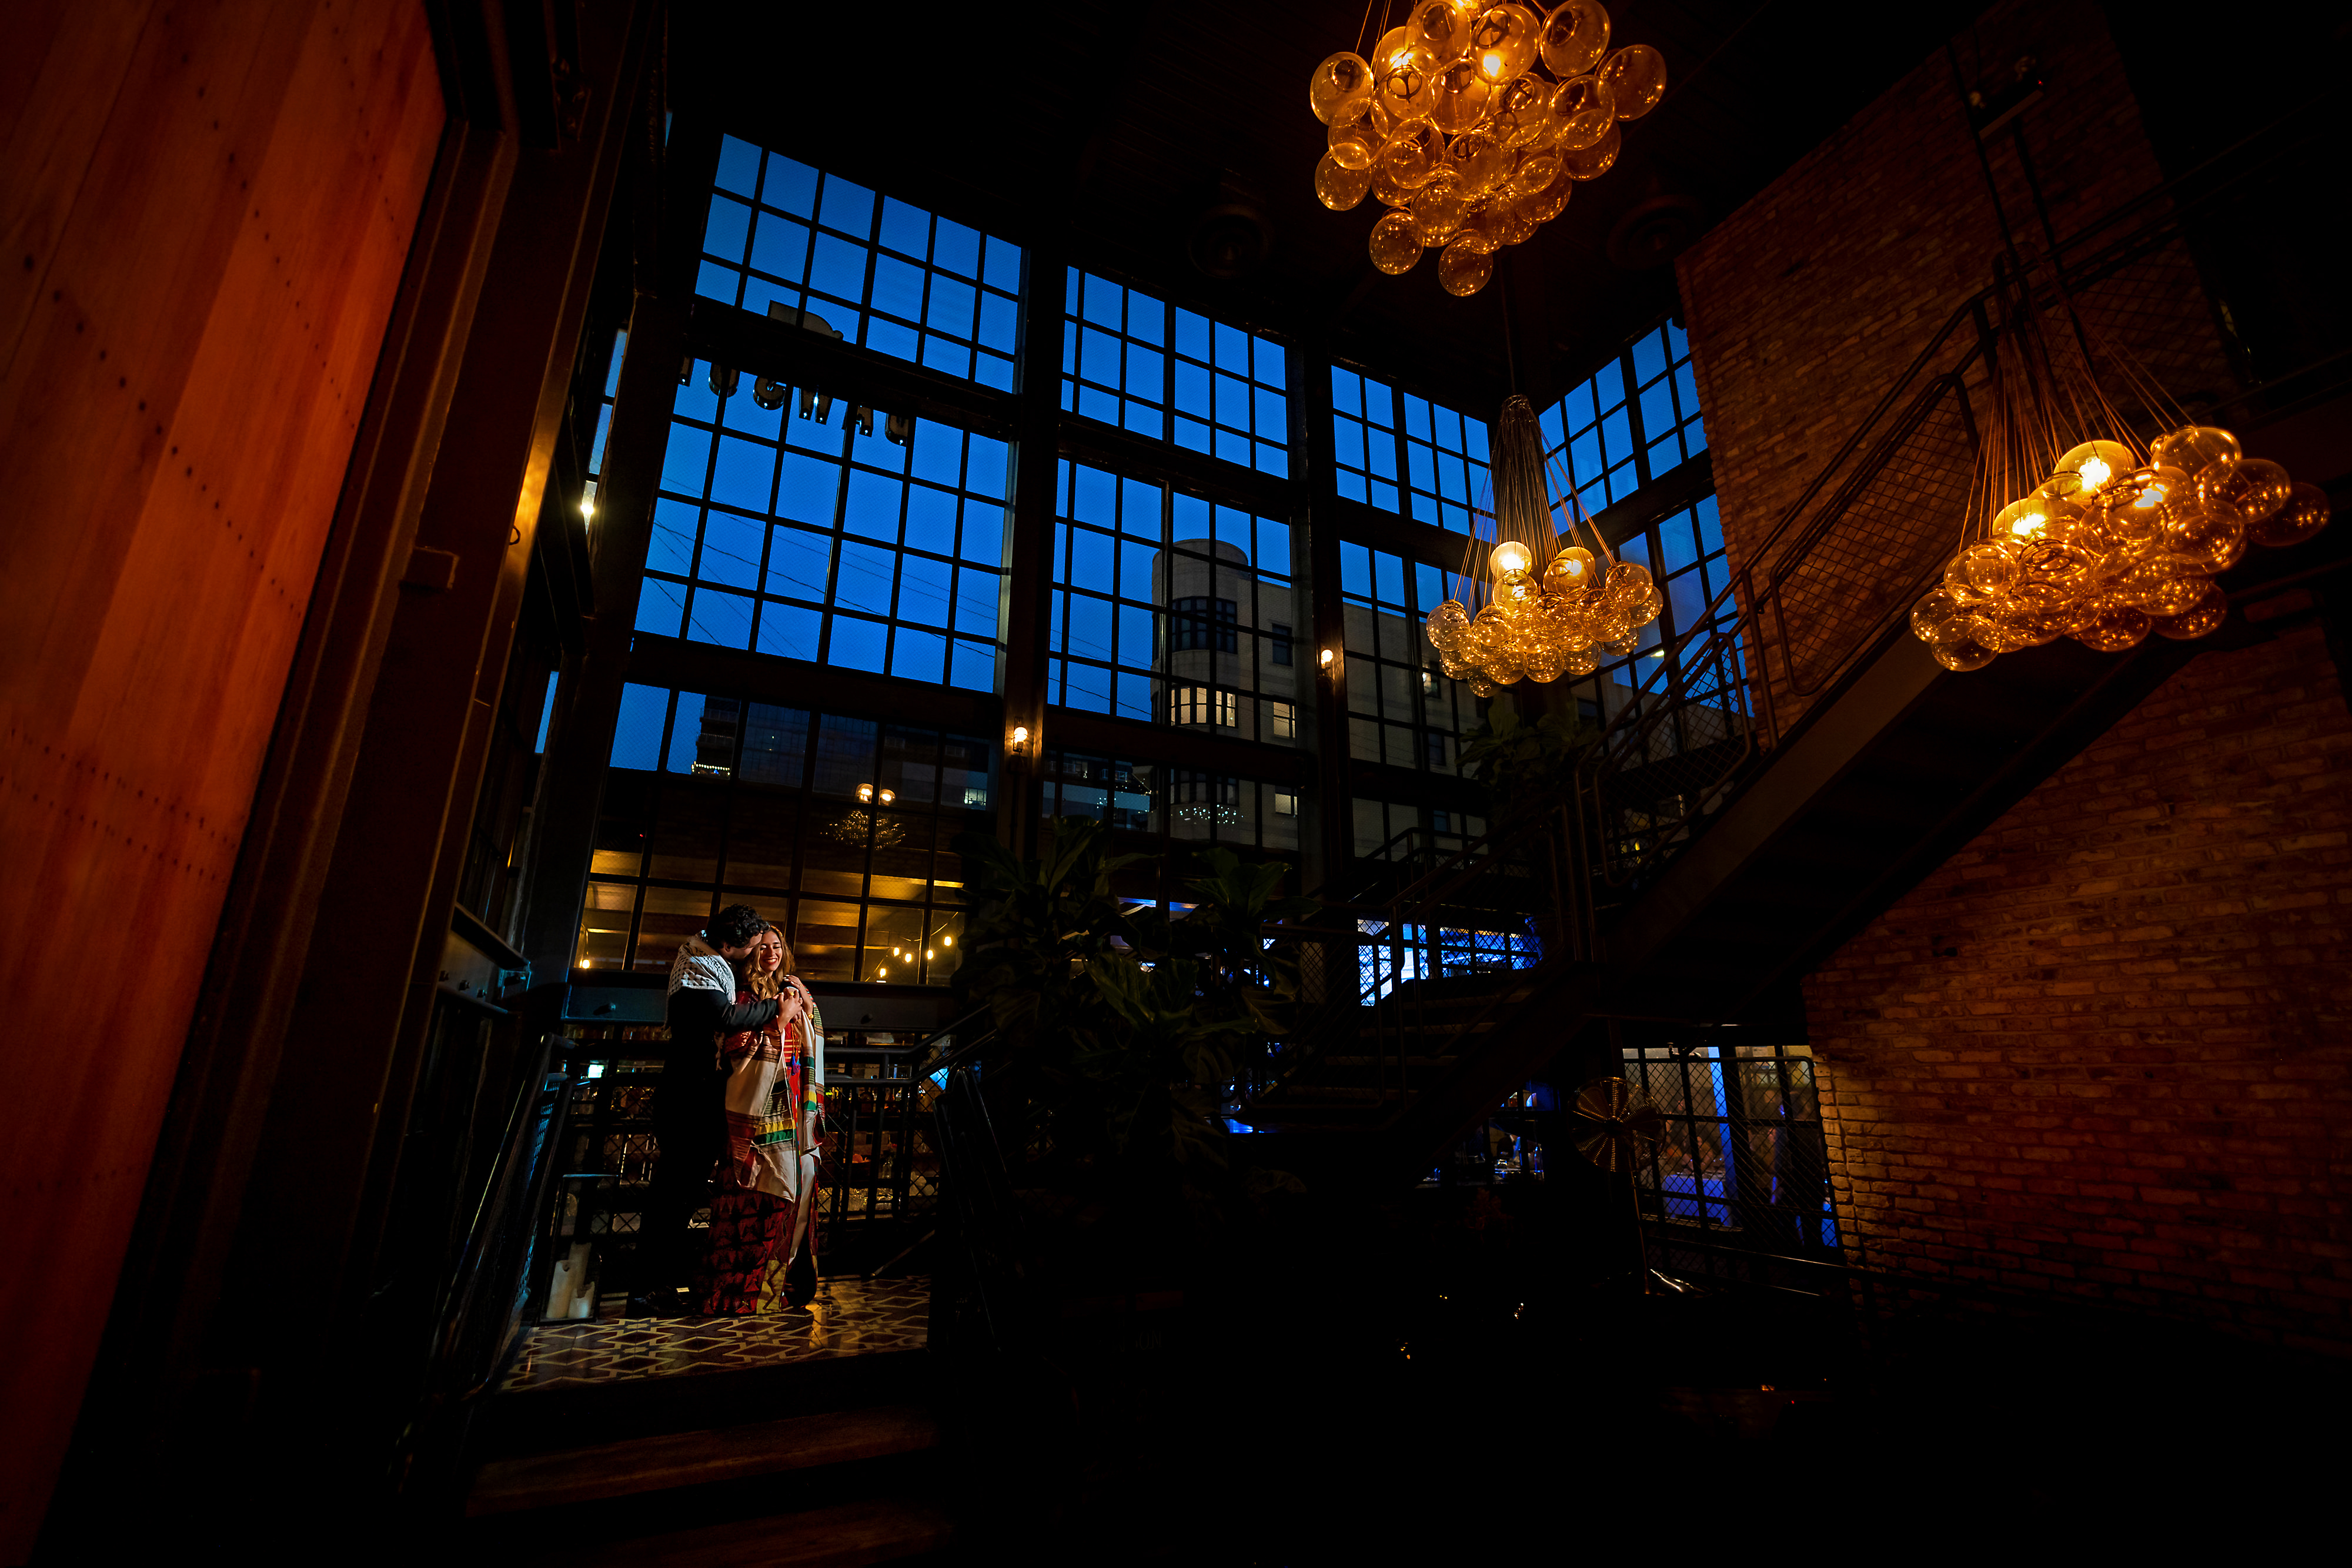 wide angle view of wedding couple on the stairs during wedding reception at The Dawson restaurant in downtown Chicago